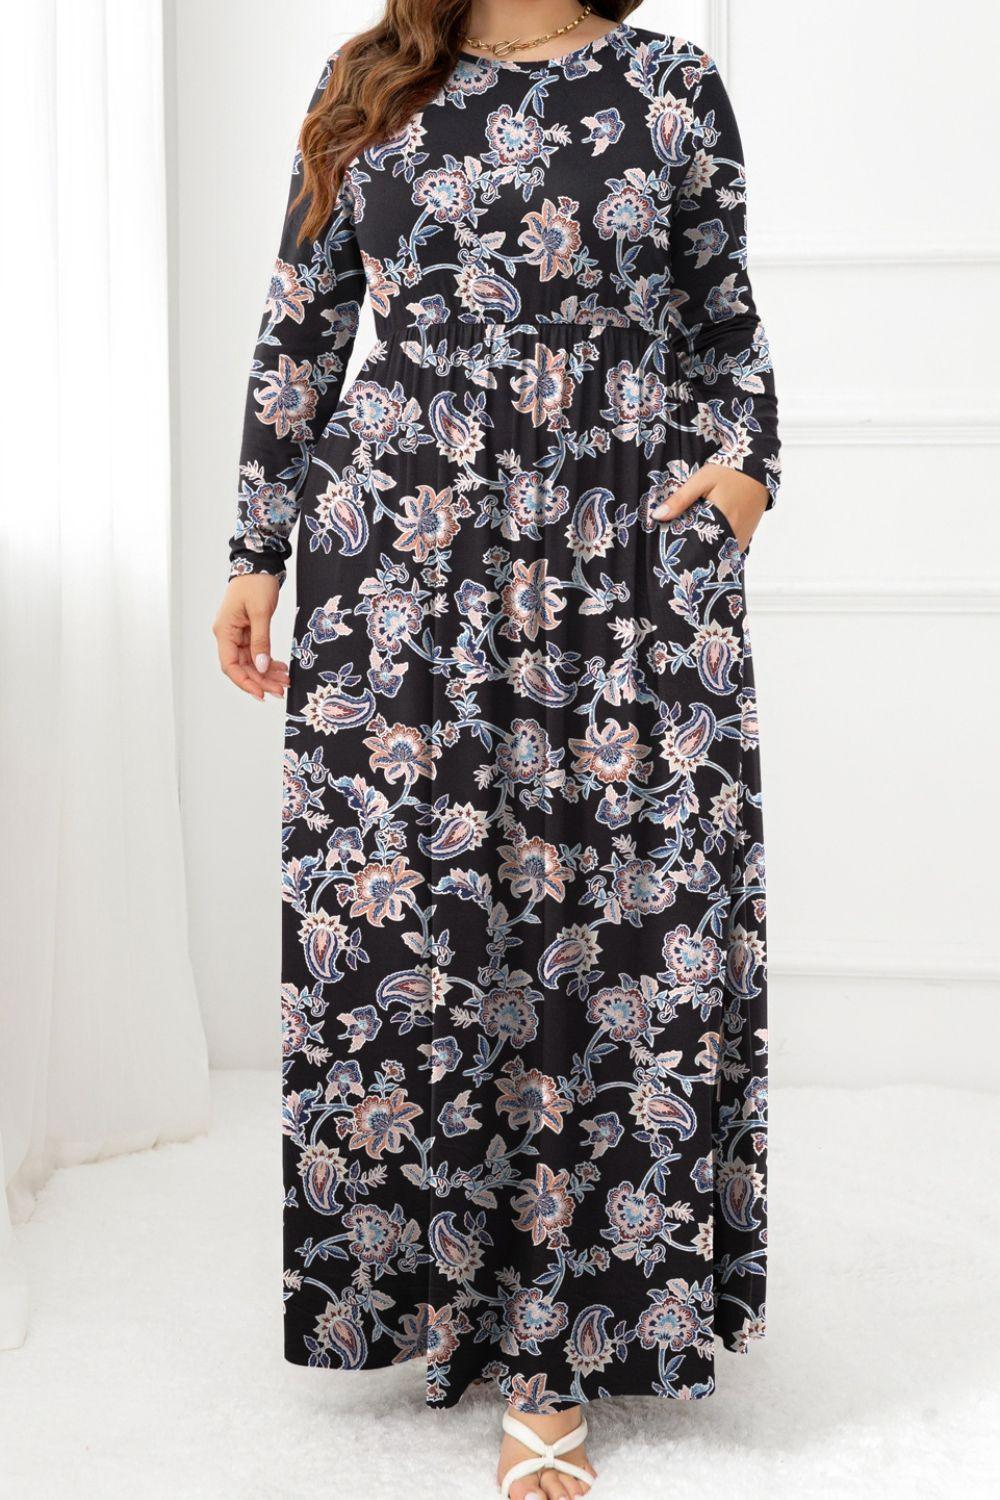 Plus Size Round Neck Long Sleeve Maxi Dress with Pockets - Lucianne Boutique